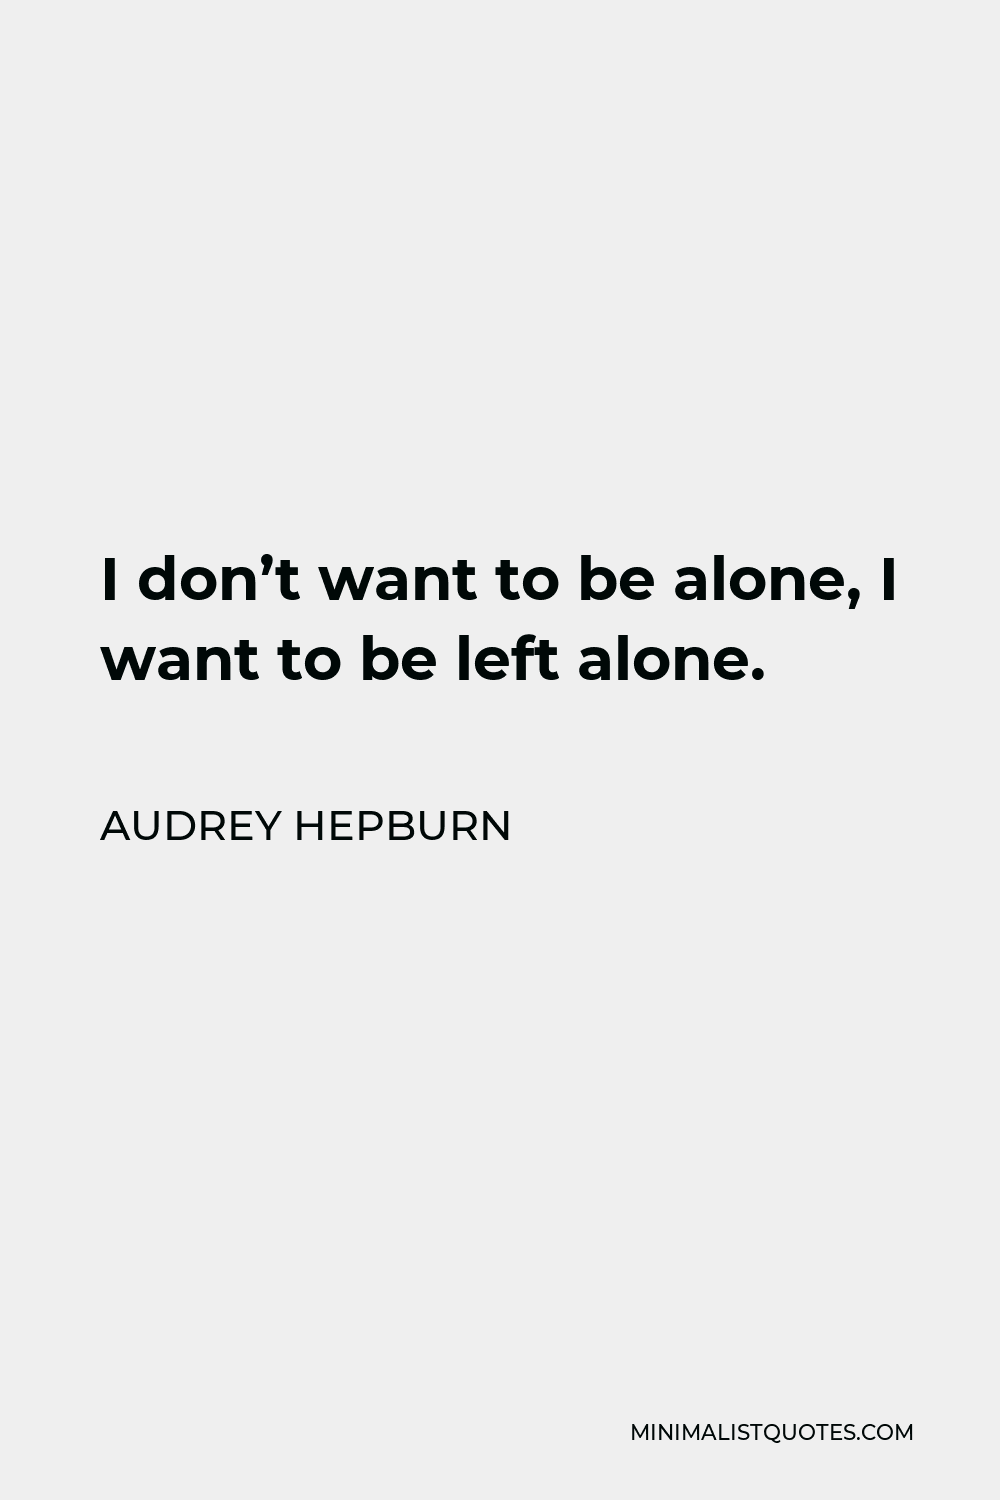 Audrey Hepburn Quote - I don’t want to be alone, I want to be left alone.